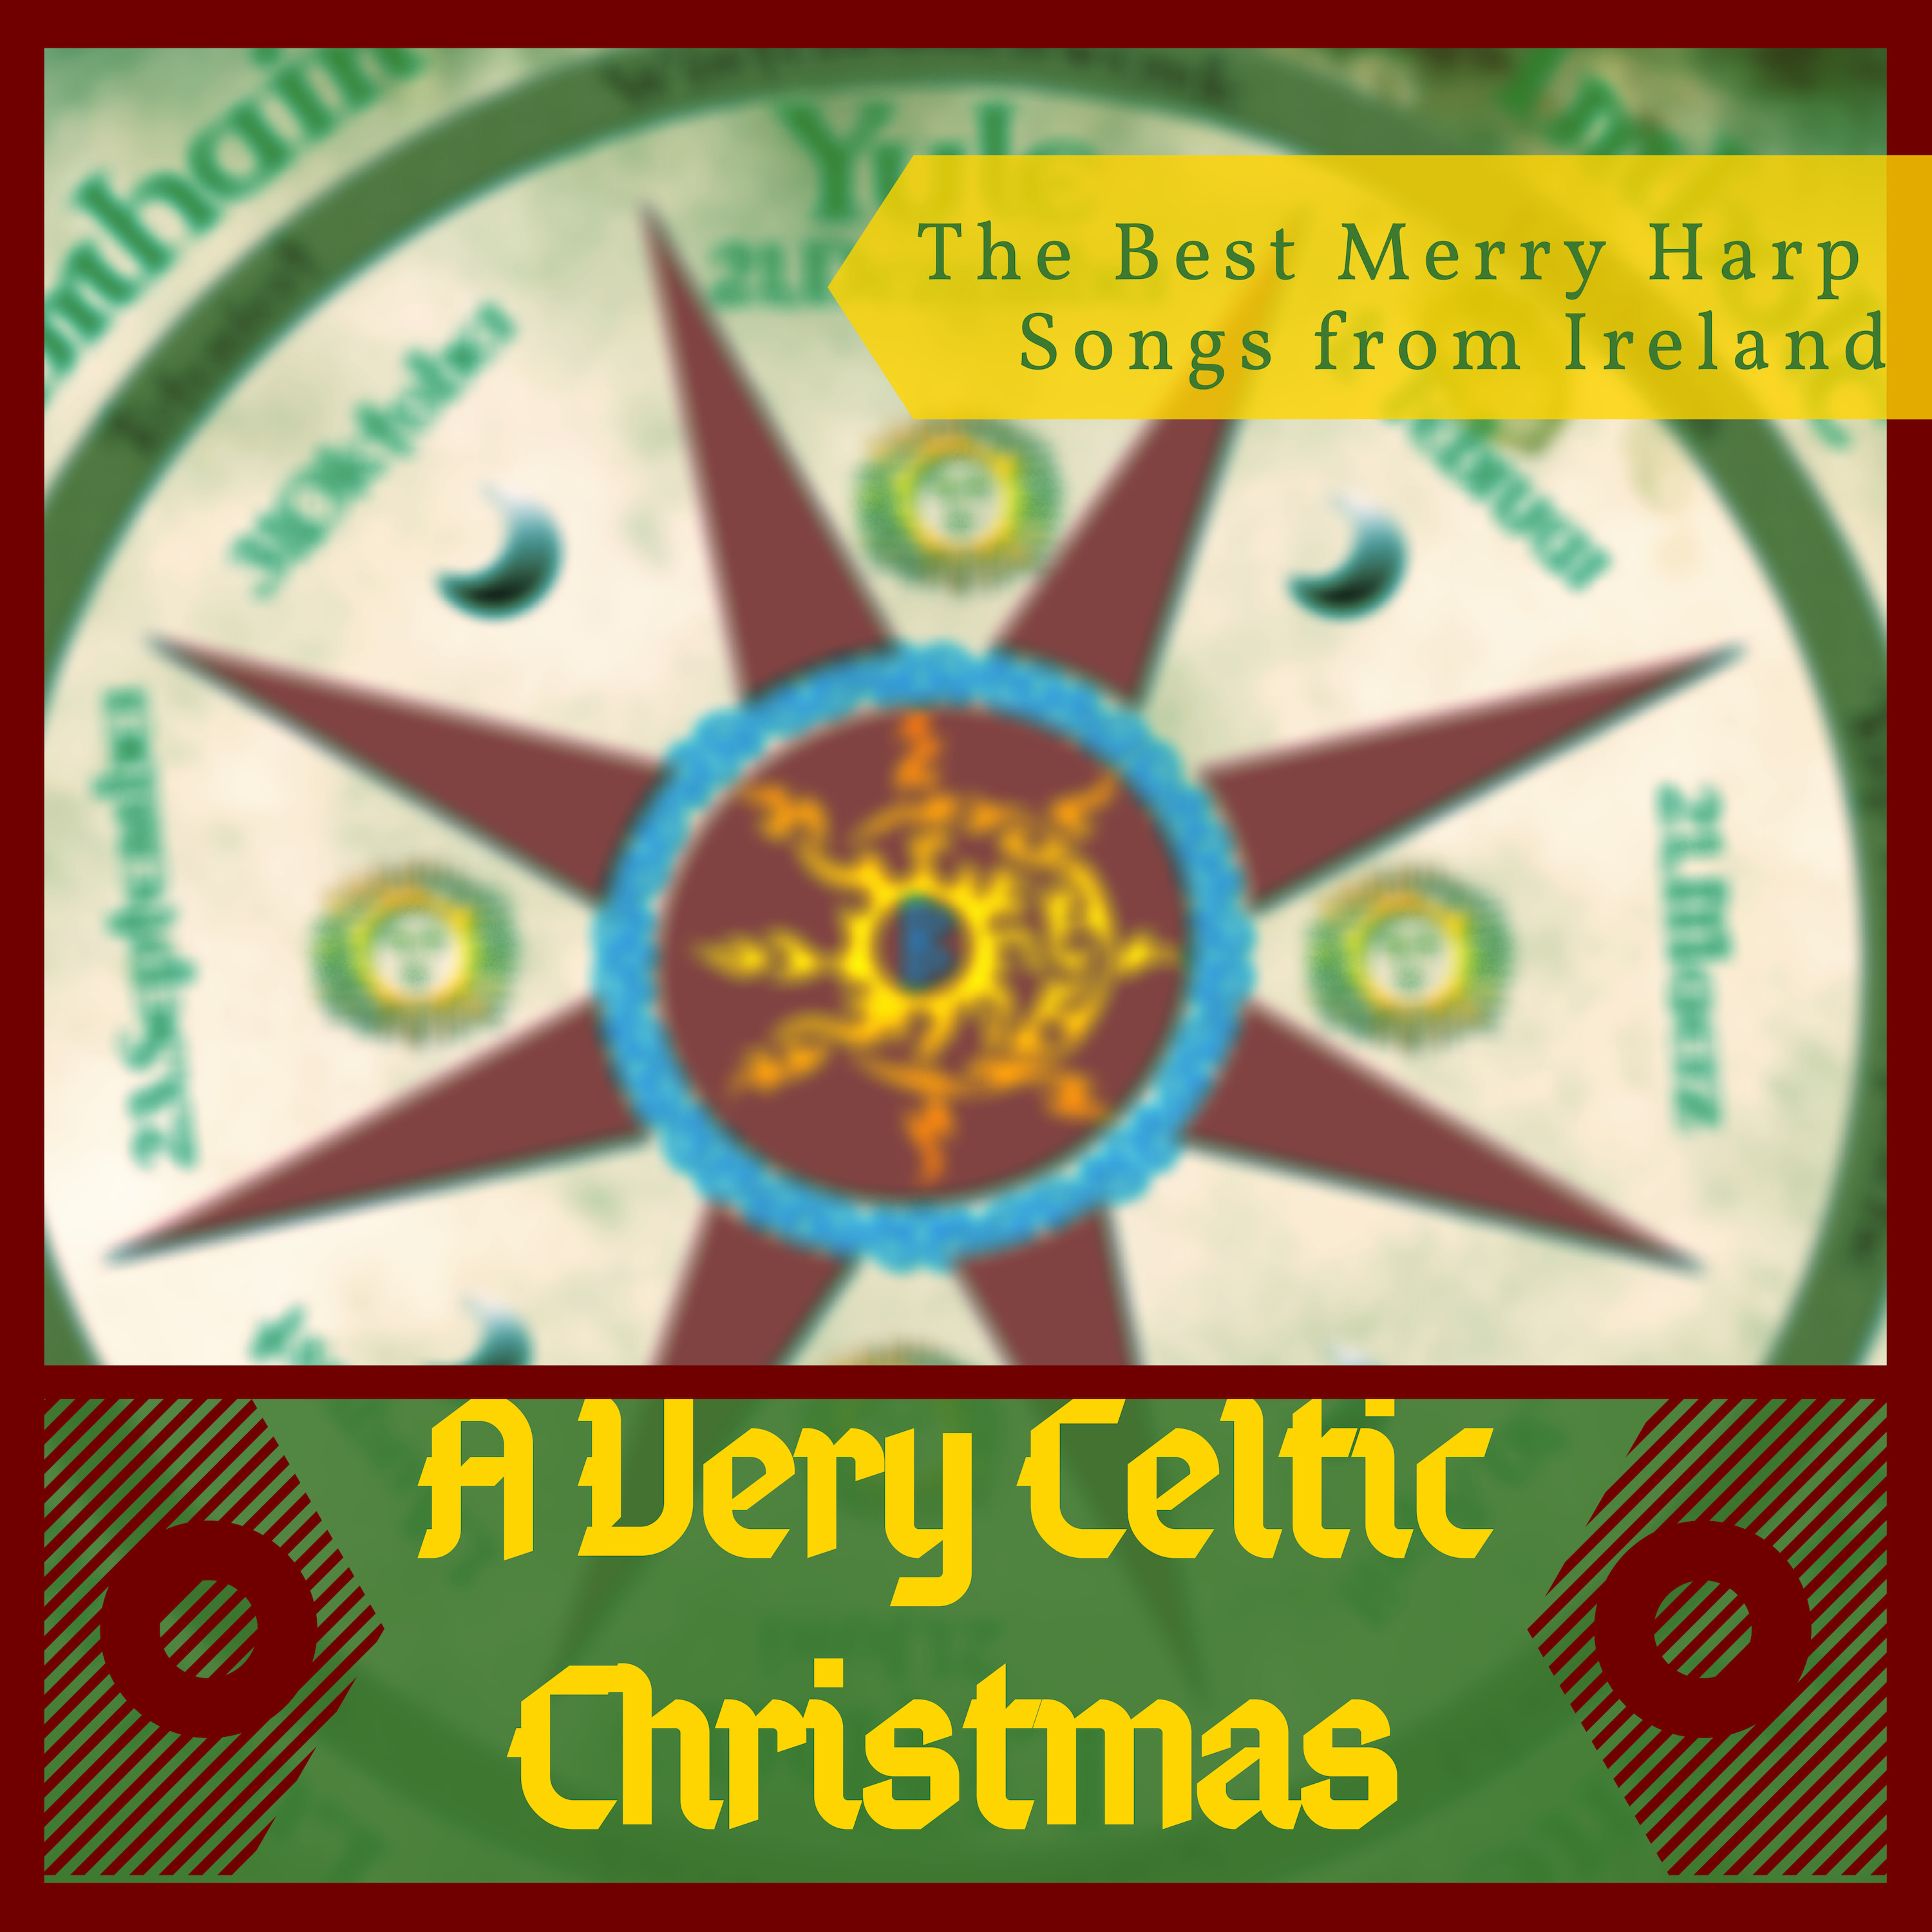 Celtic Christmas Song from Ireland